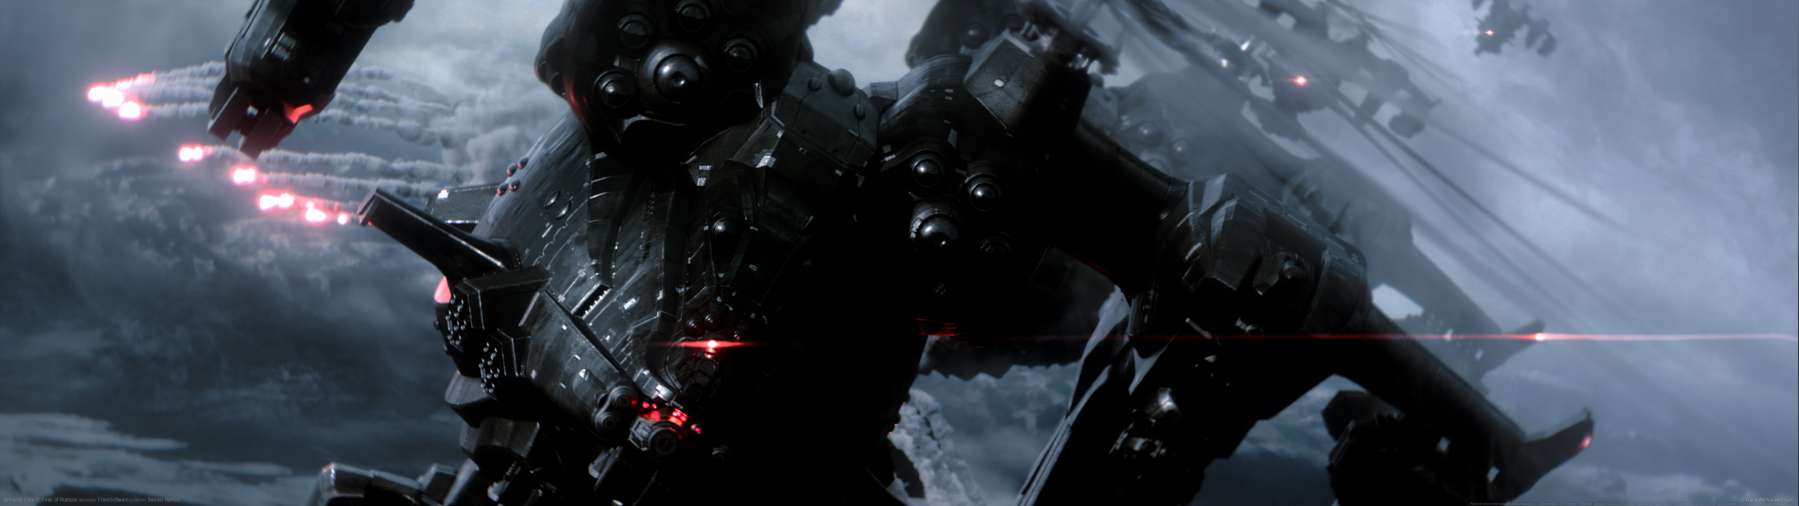 Armored Core 6: Fires of Rubicon fond d'cran